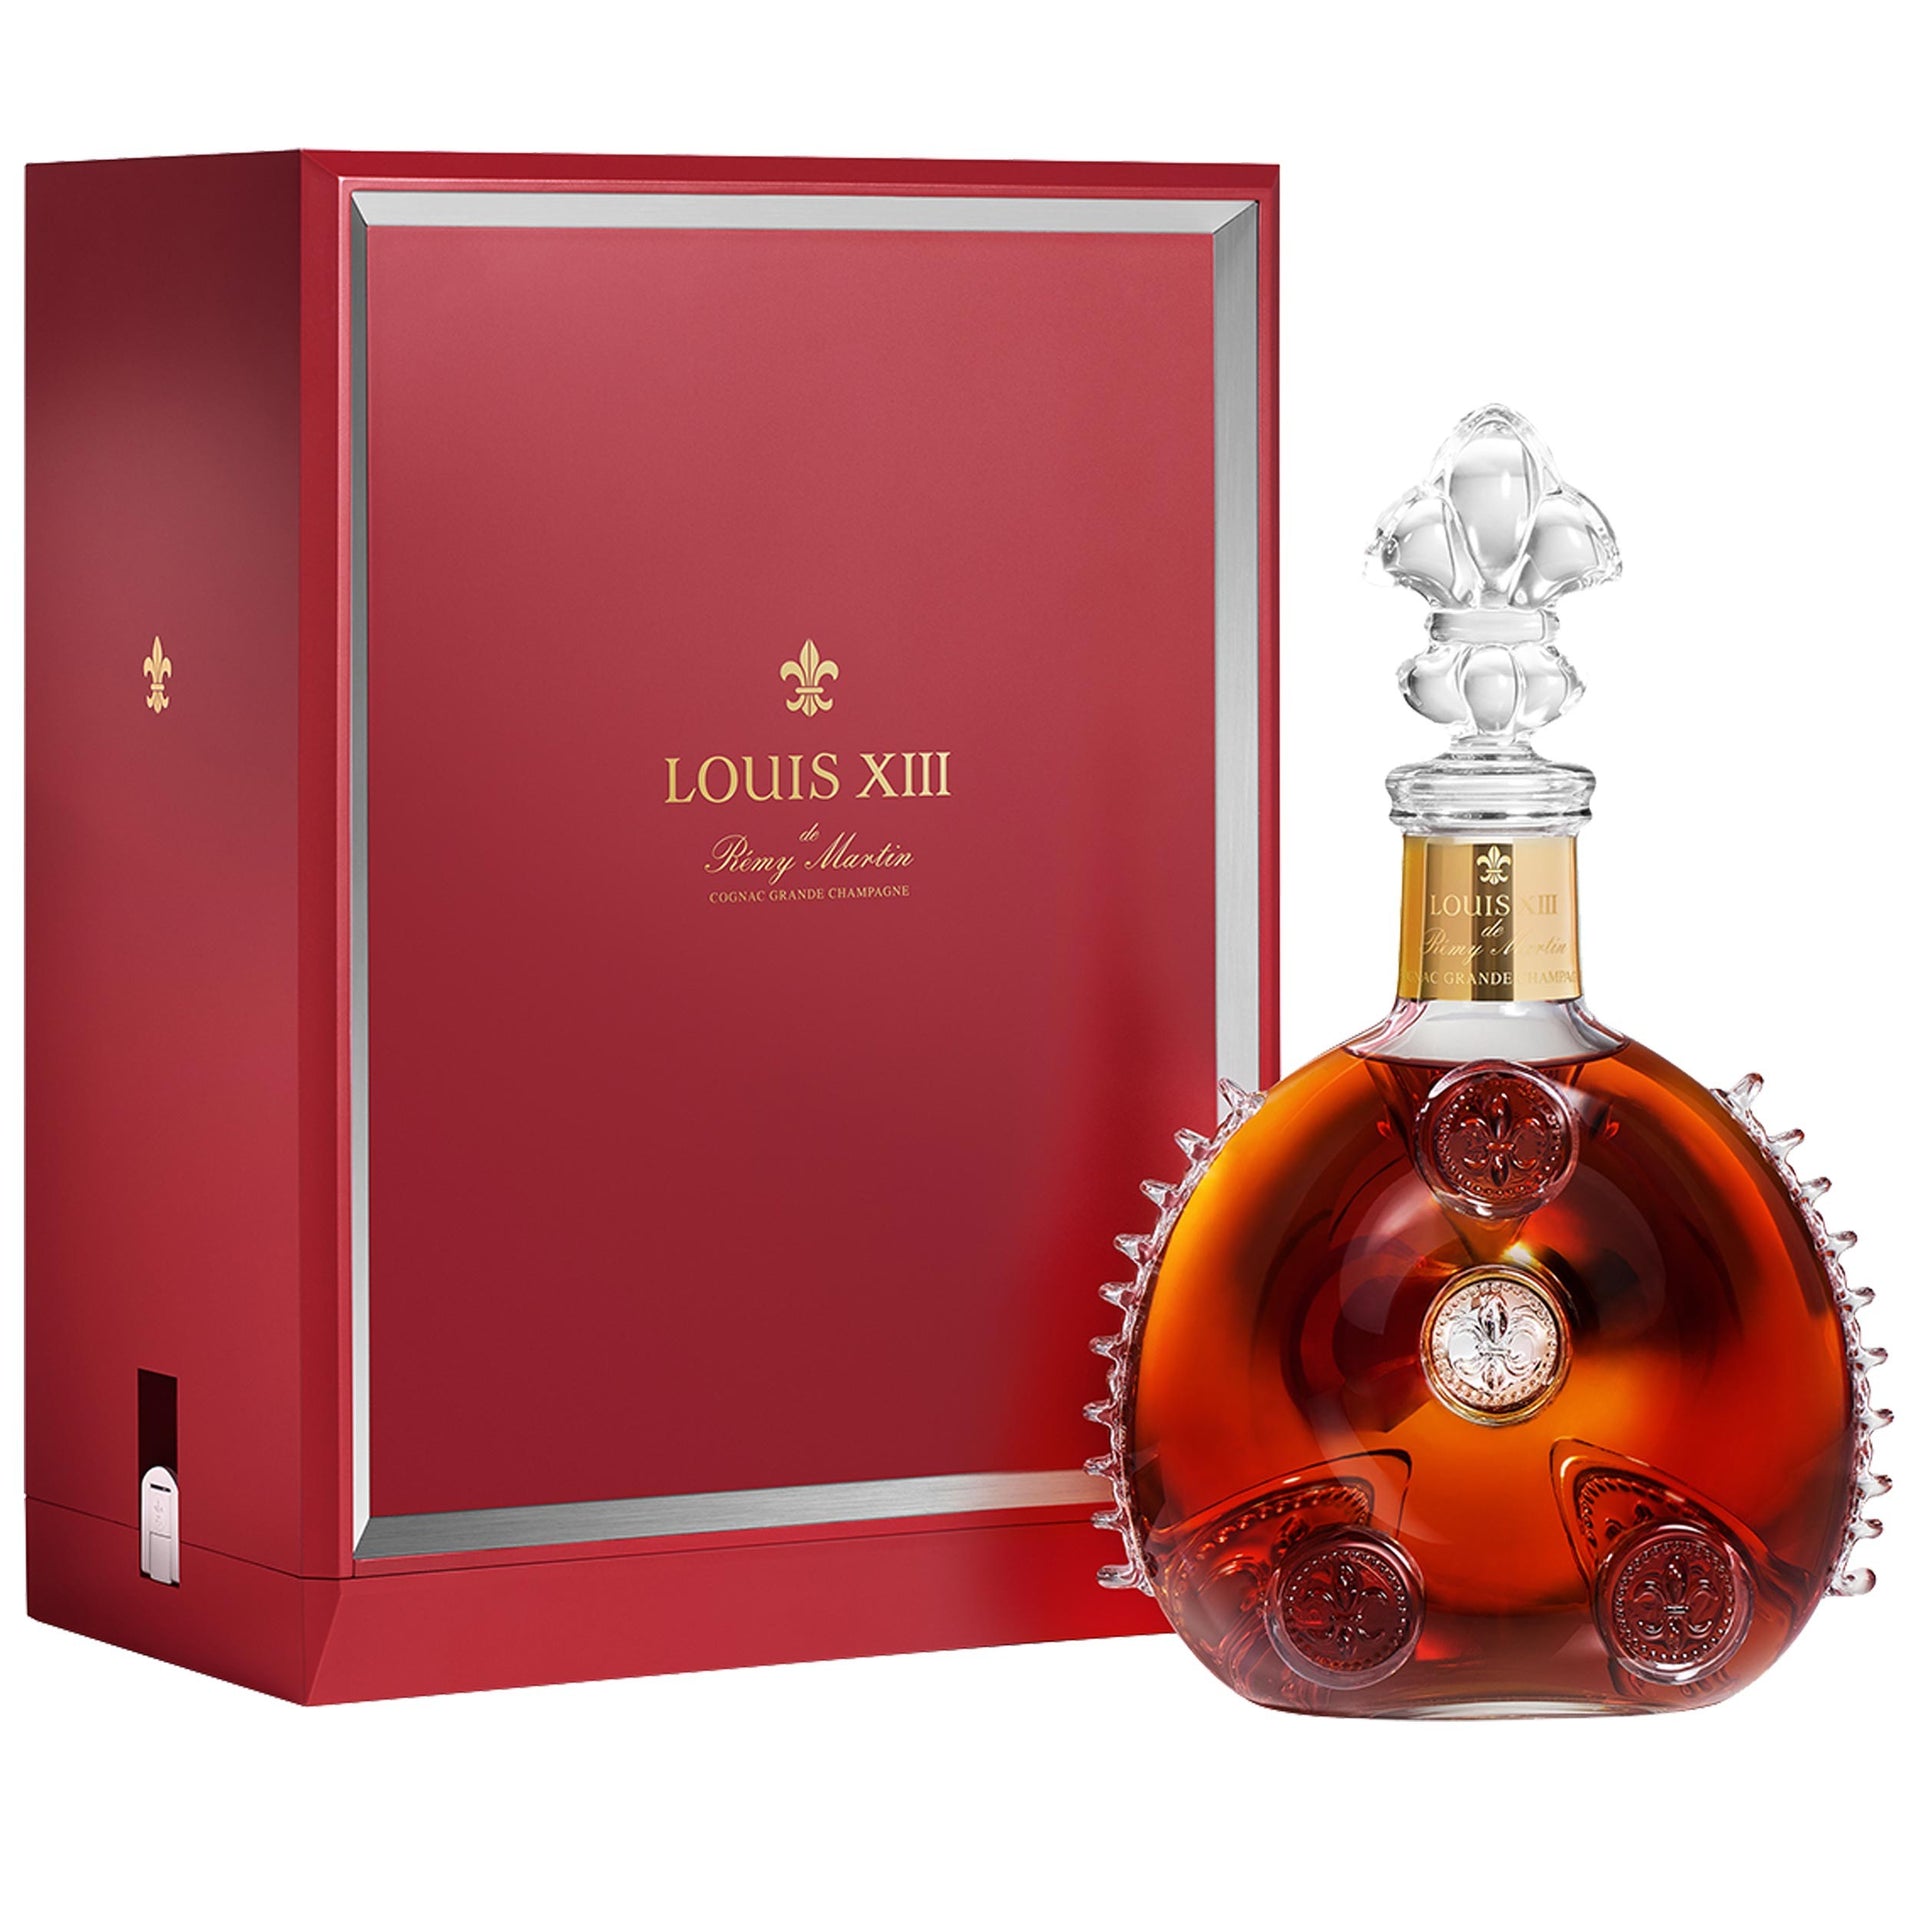 Louis XIII Cognac by Remy Martin 750ml-0